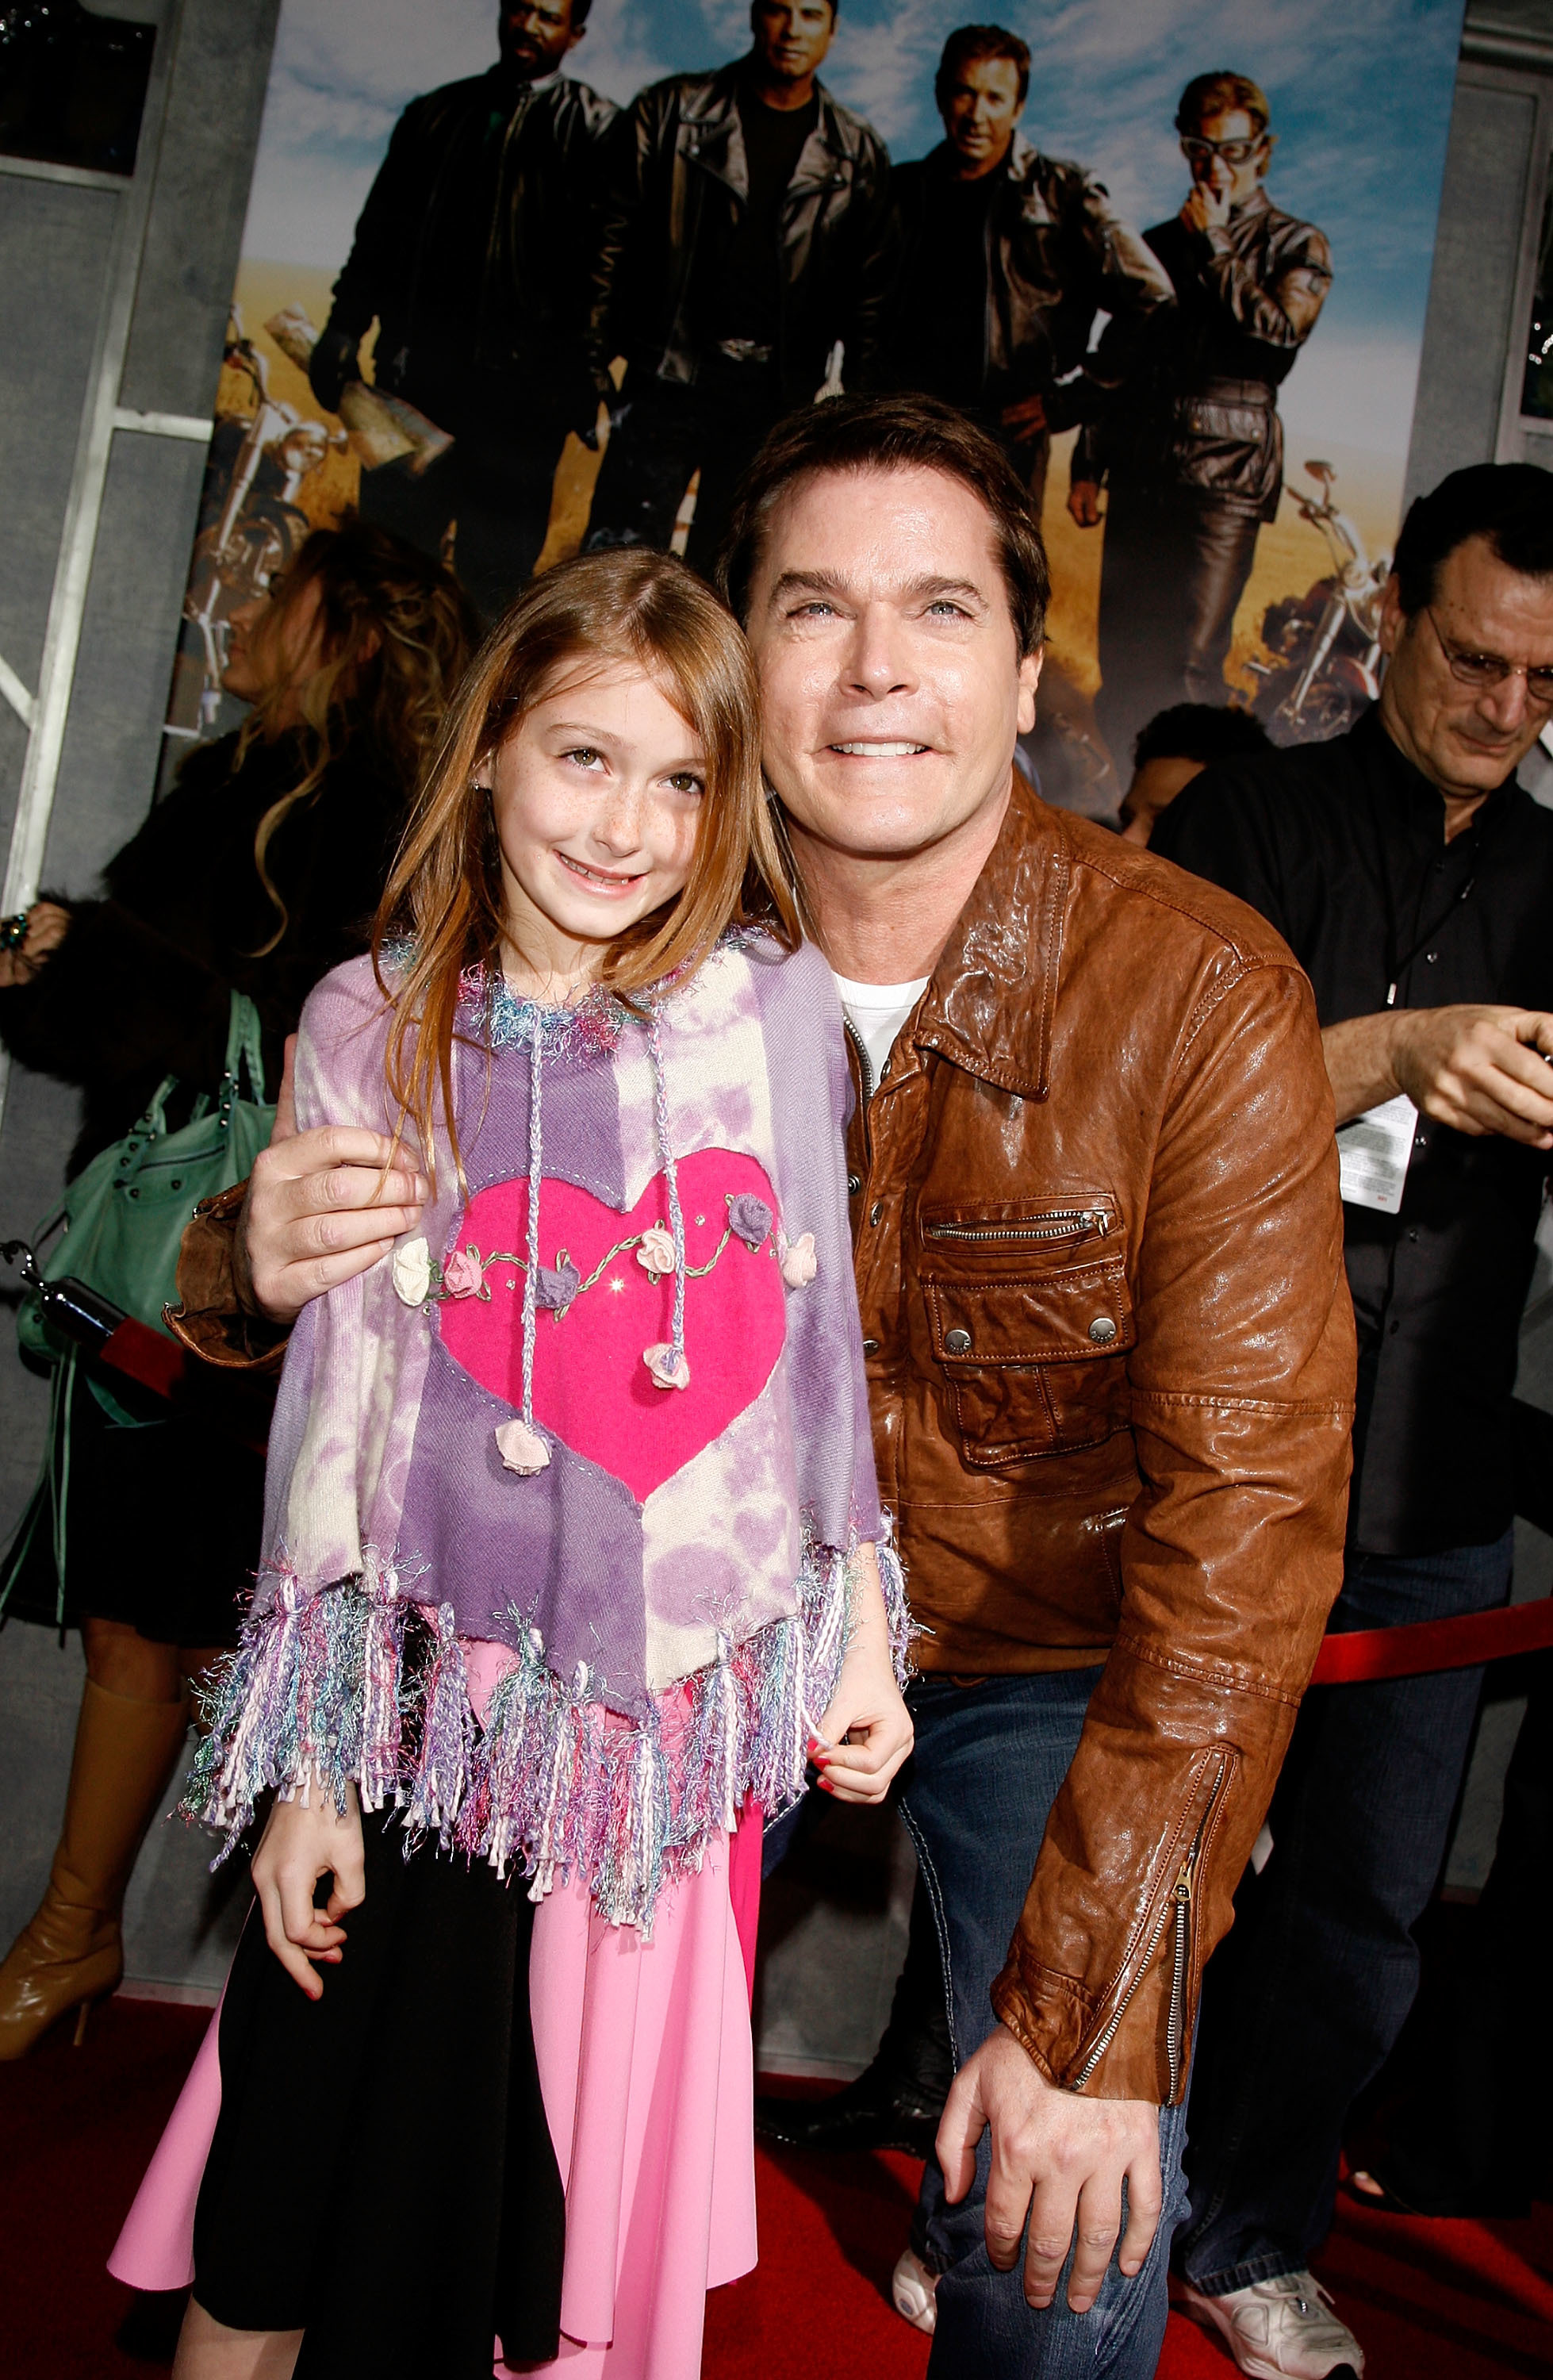 <p>The late Ray Liotta brought Karsen, his daughter with actress Michelle Grace, to the premiere of "Wild Hogs" in Hollywood on Feb. 27, 2007, when she was 8. Keep reading to see what Karsen, who followed her parents into the entertainment business, looks like today…</p>